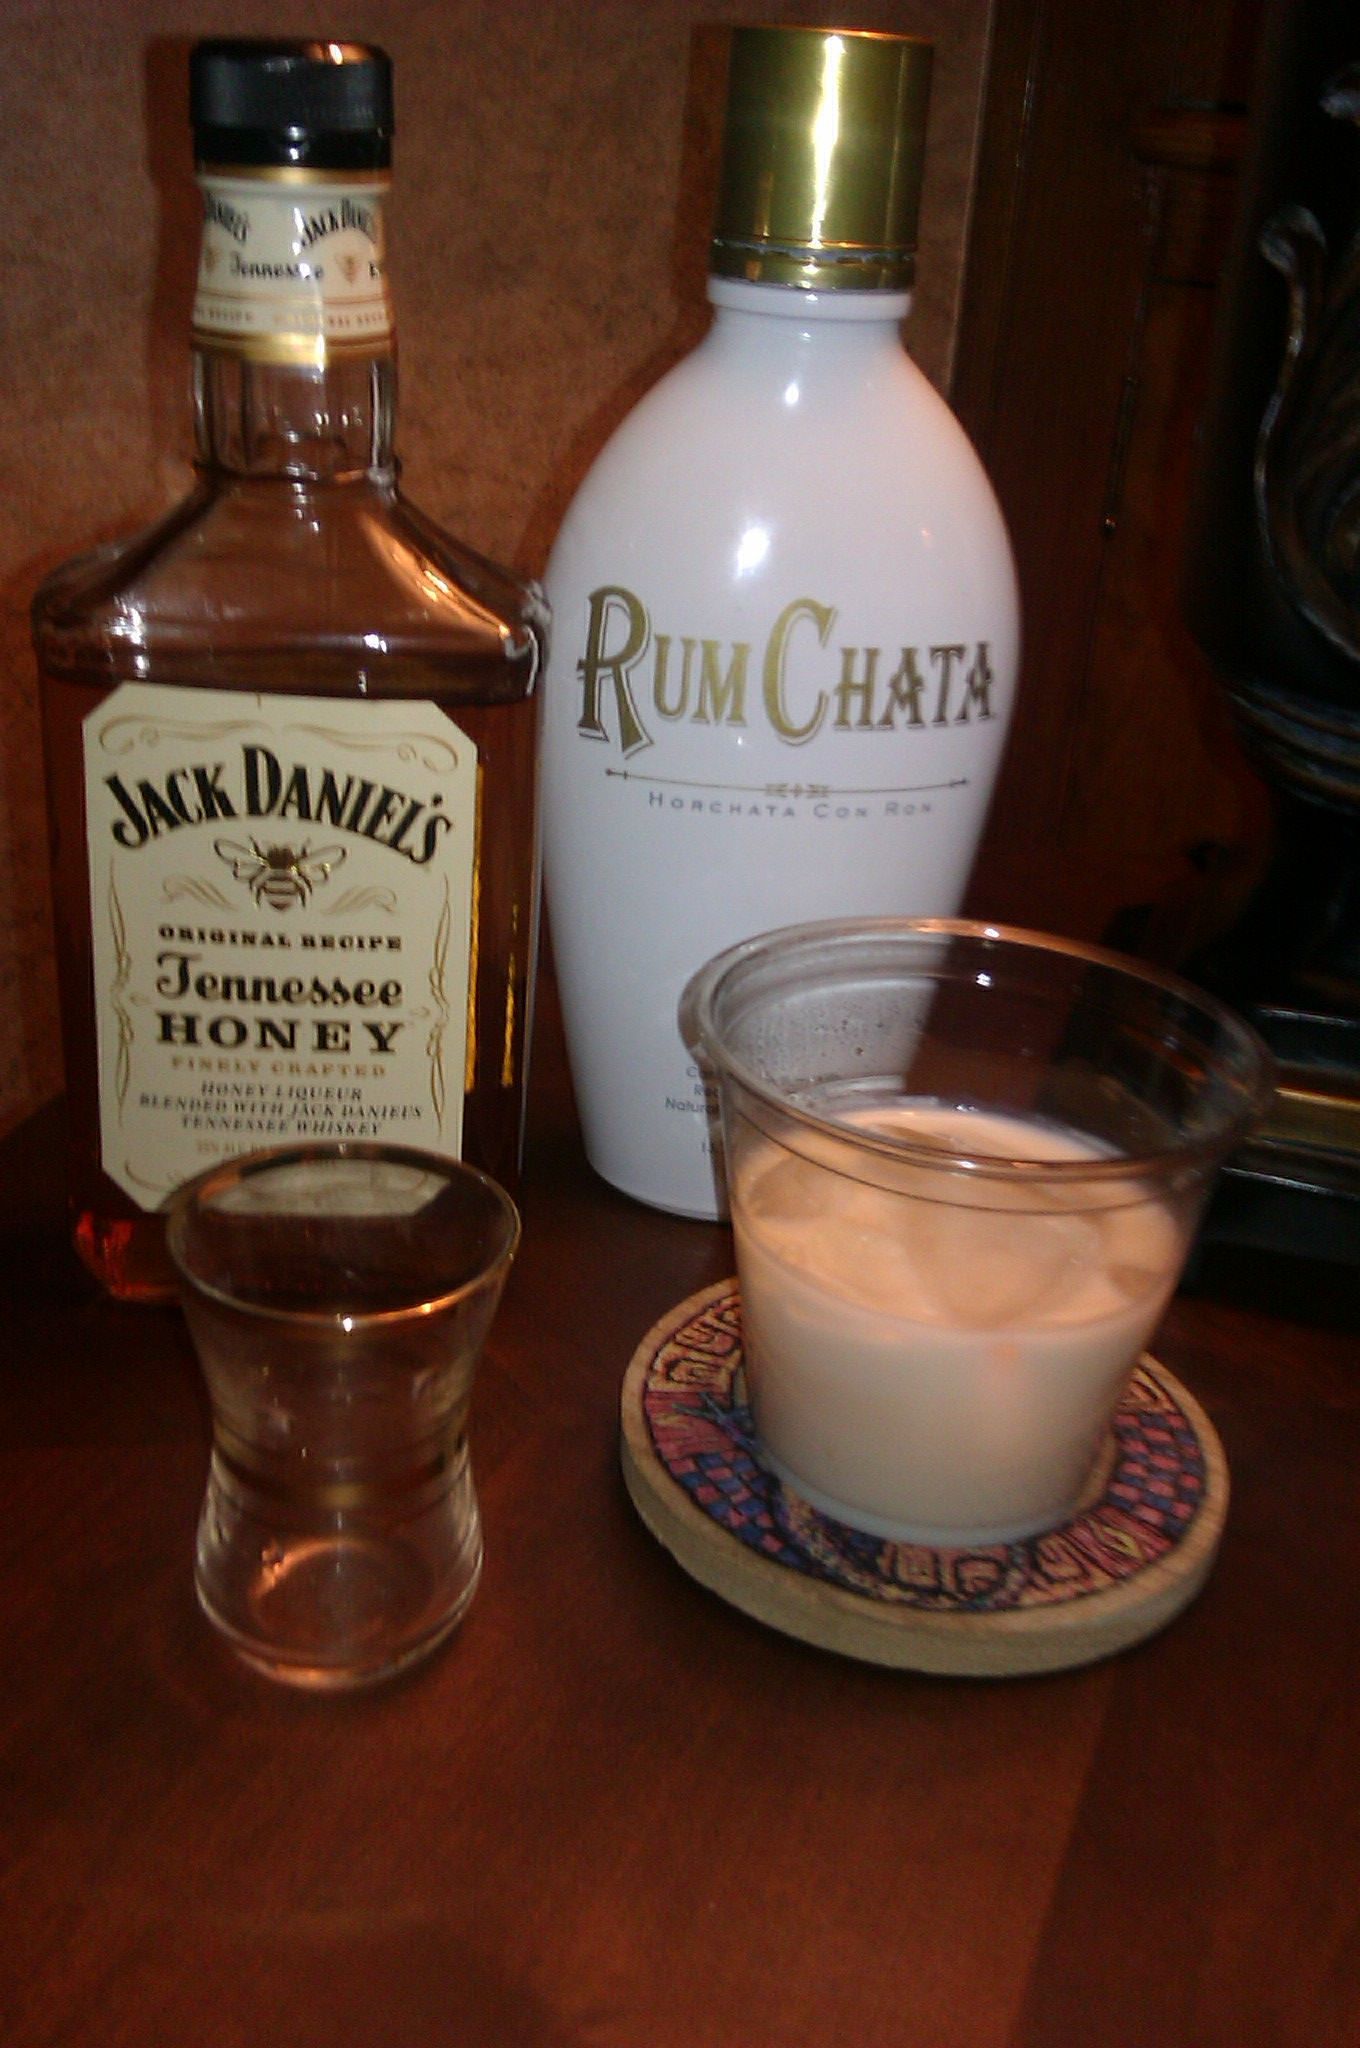 Need a new drink? Try a honey badger.  Rumchata and Jack Daniels honey whiskey.